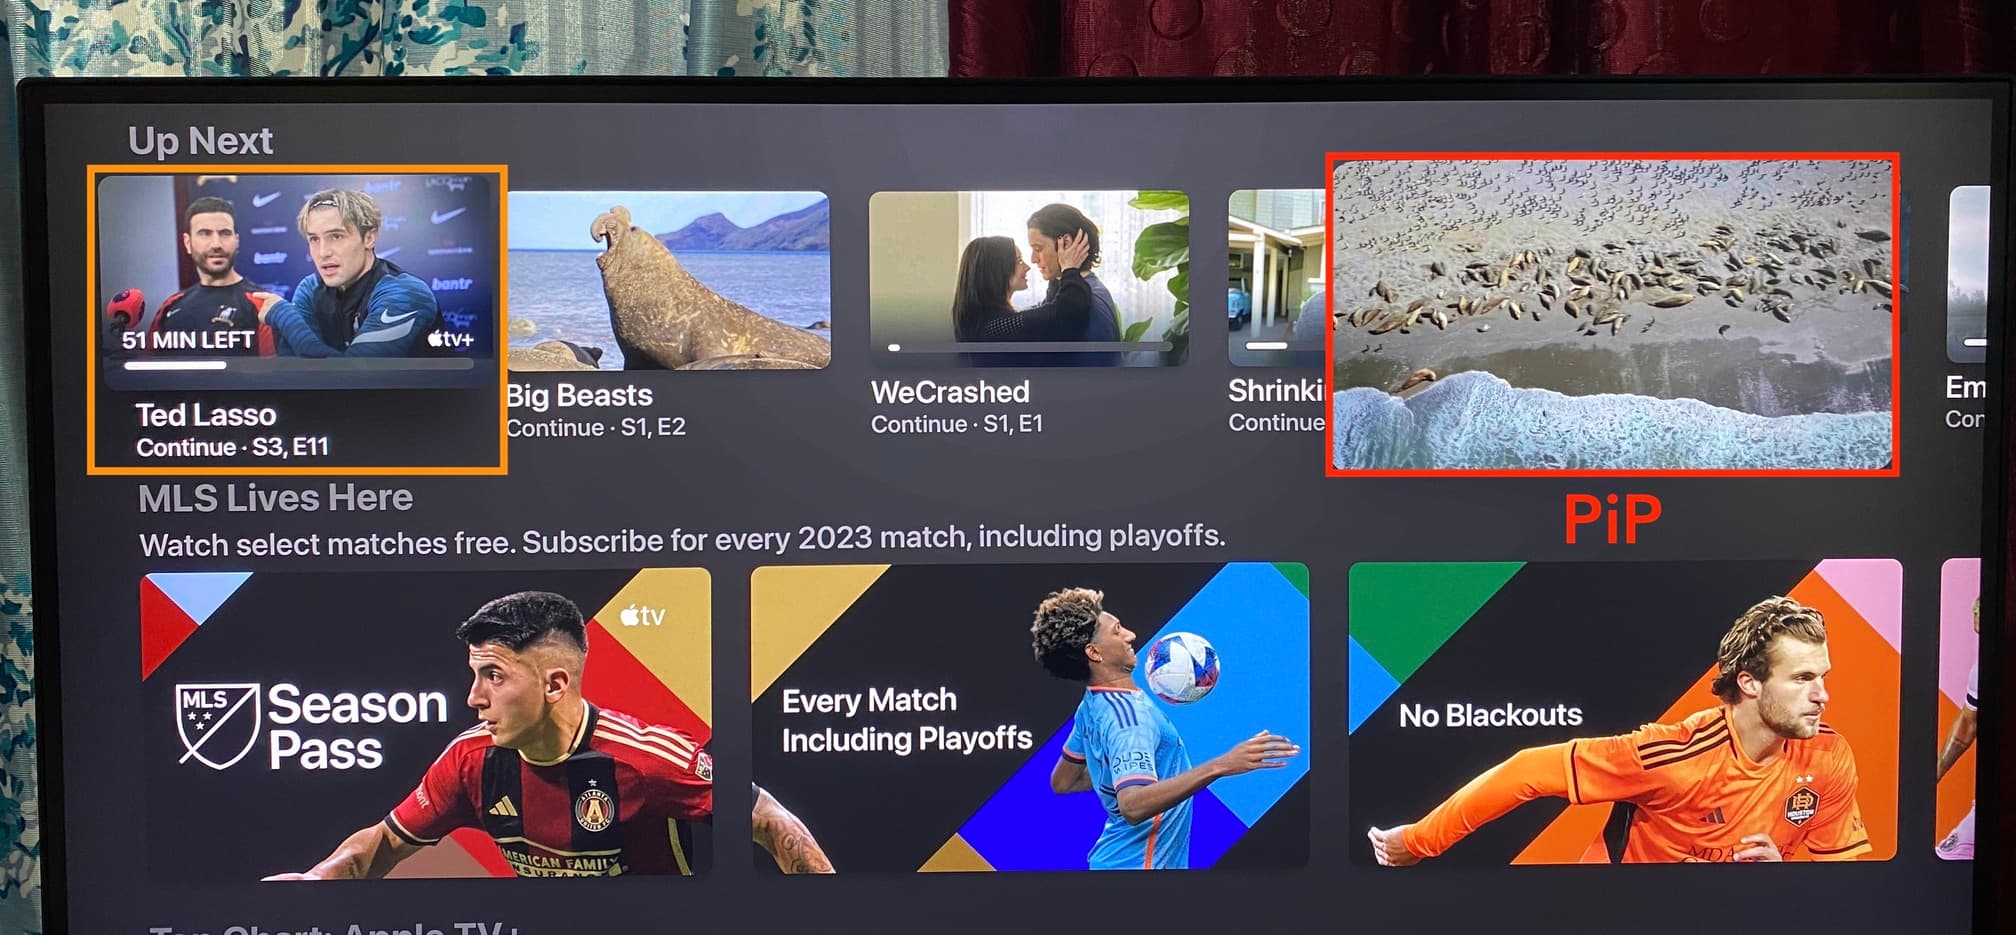 Select another video while PiP is active on Apple TV